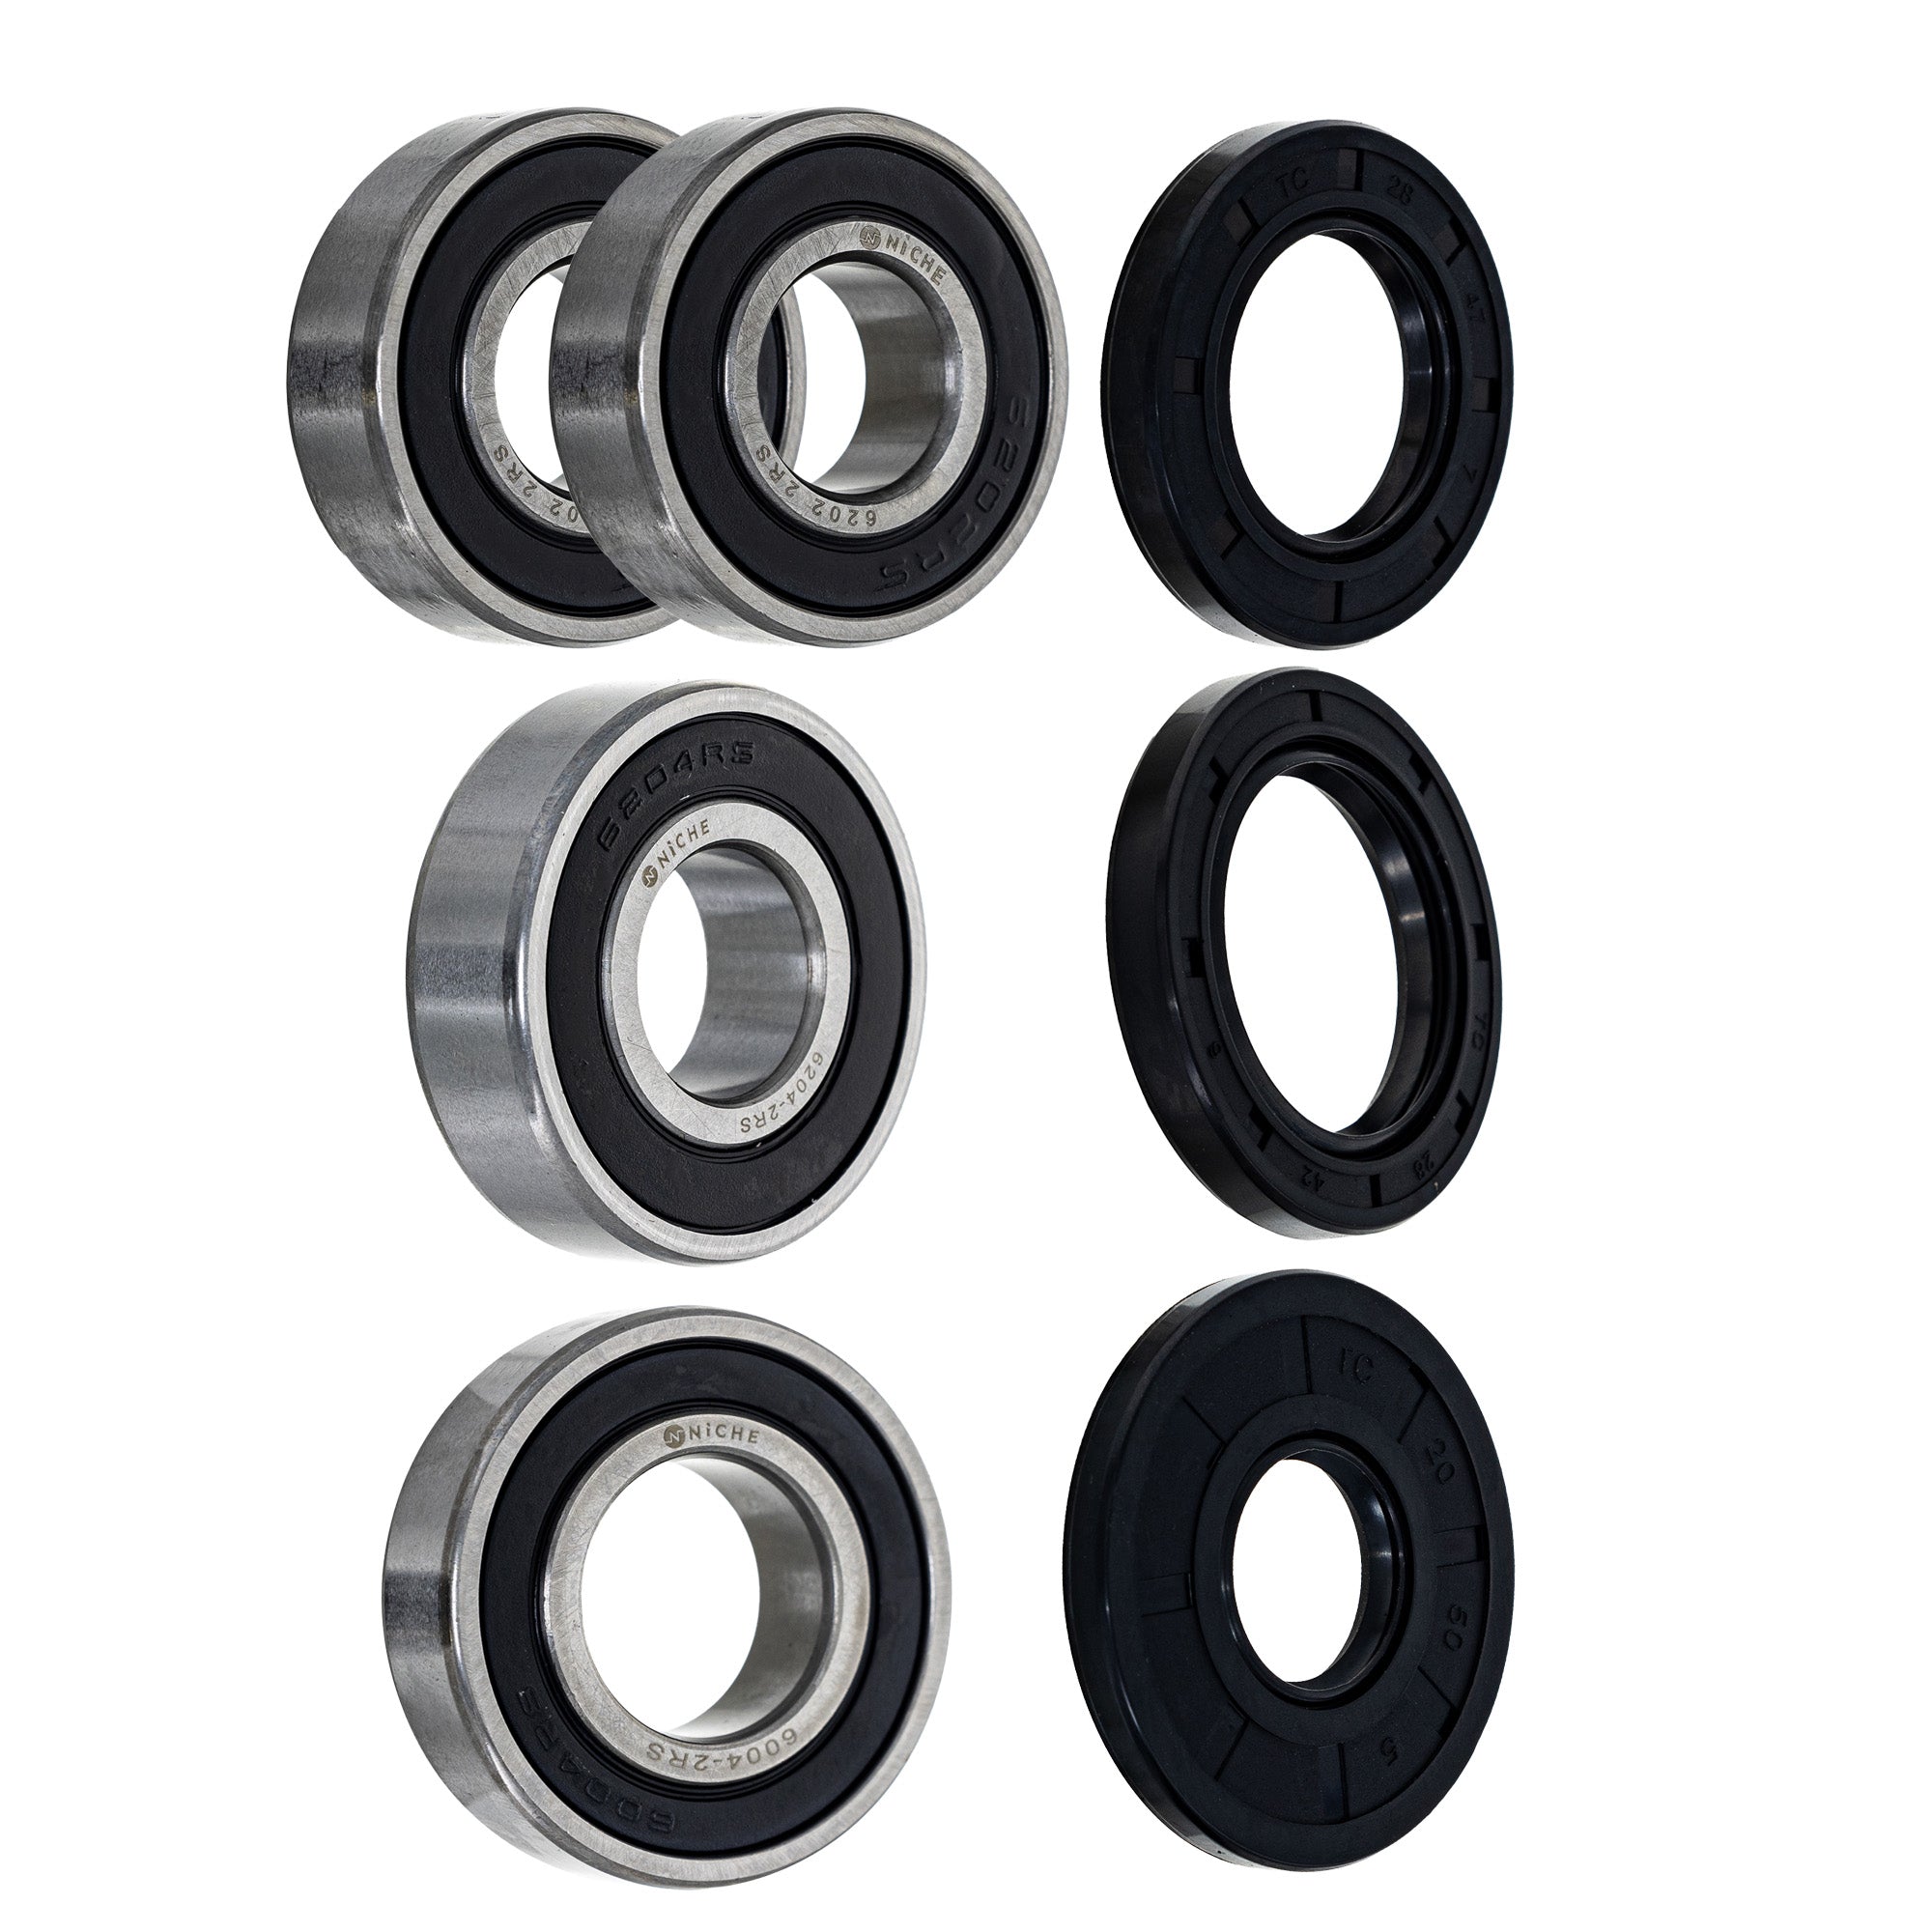 Wheel Bearing Seal Kit for zOTHER Ref No CR480R CR250R CR125R NICHE MK1008795